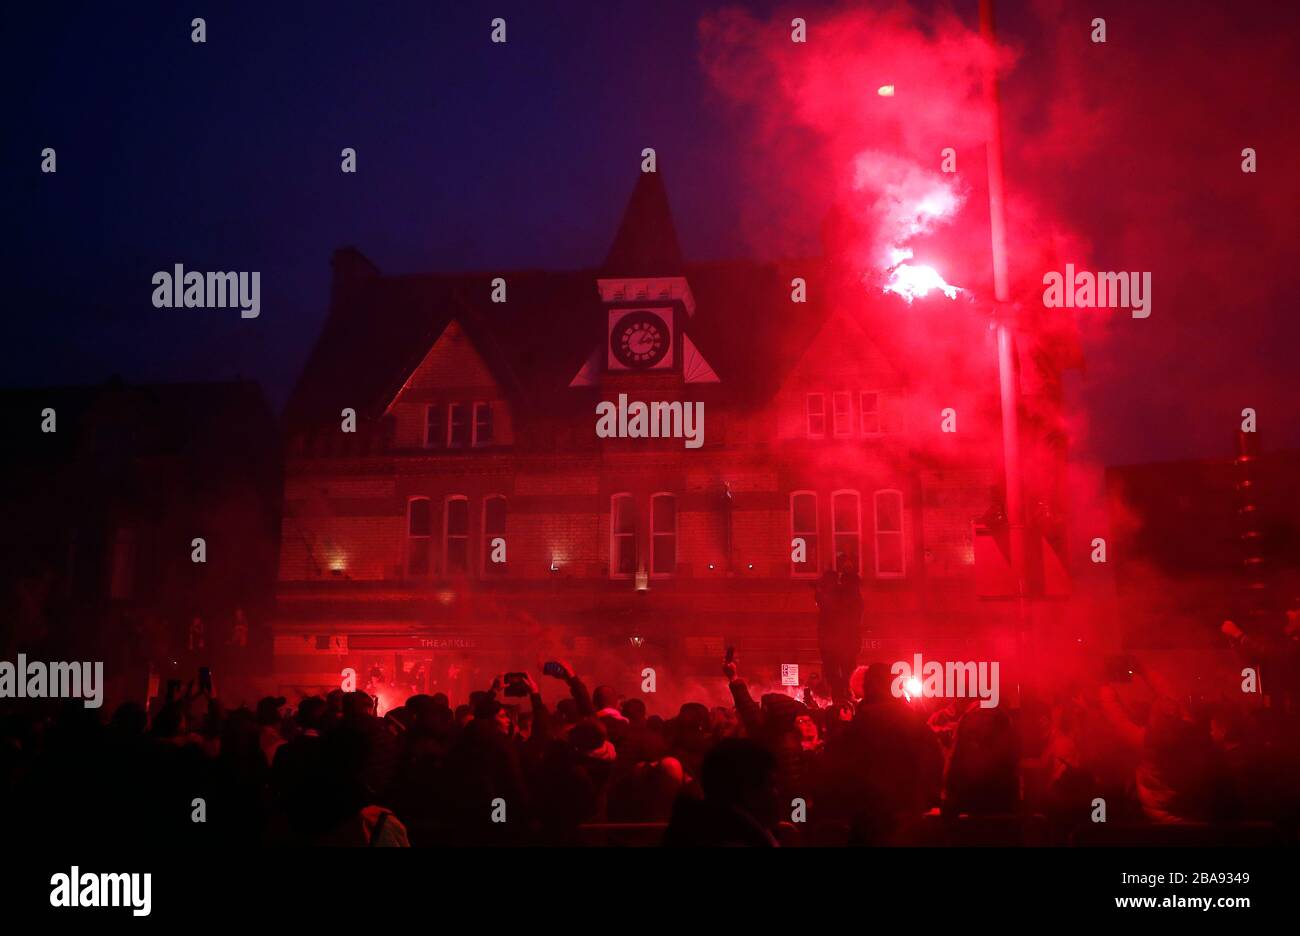 Fans let off flares ahead of the UEFA Champions League round of 16 second leg match at Anfield, Liverpool. Stock Photo